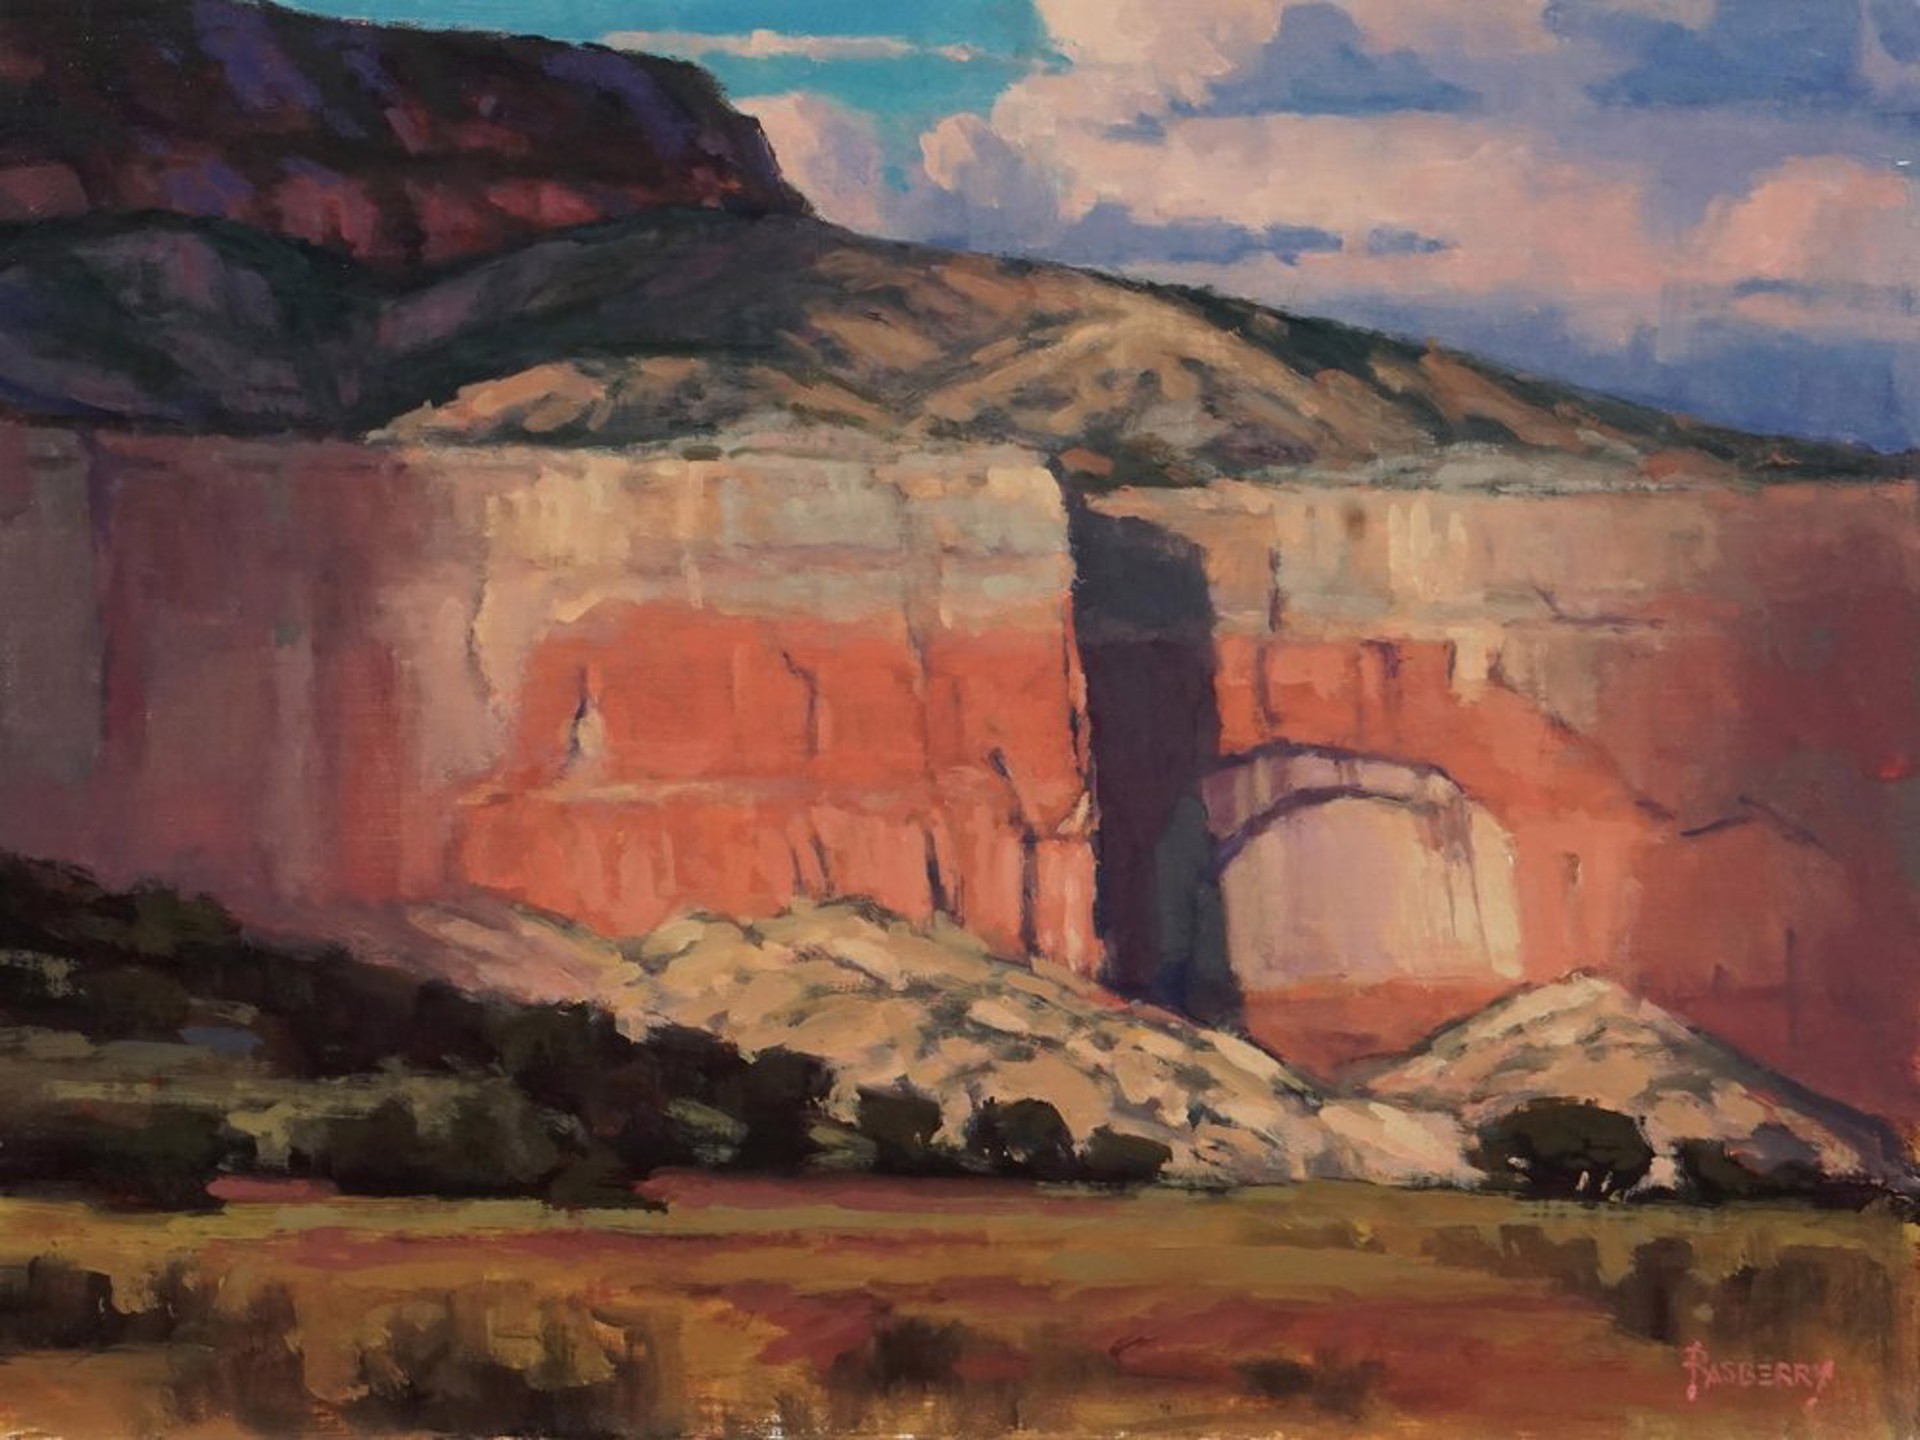 Colors of Abiquiu Country by John Rasberry